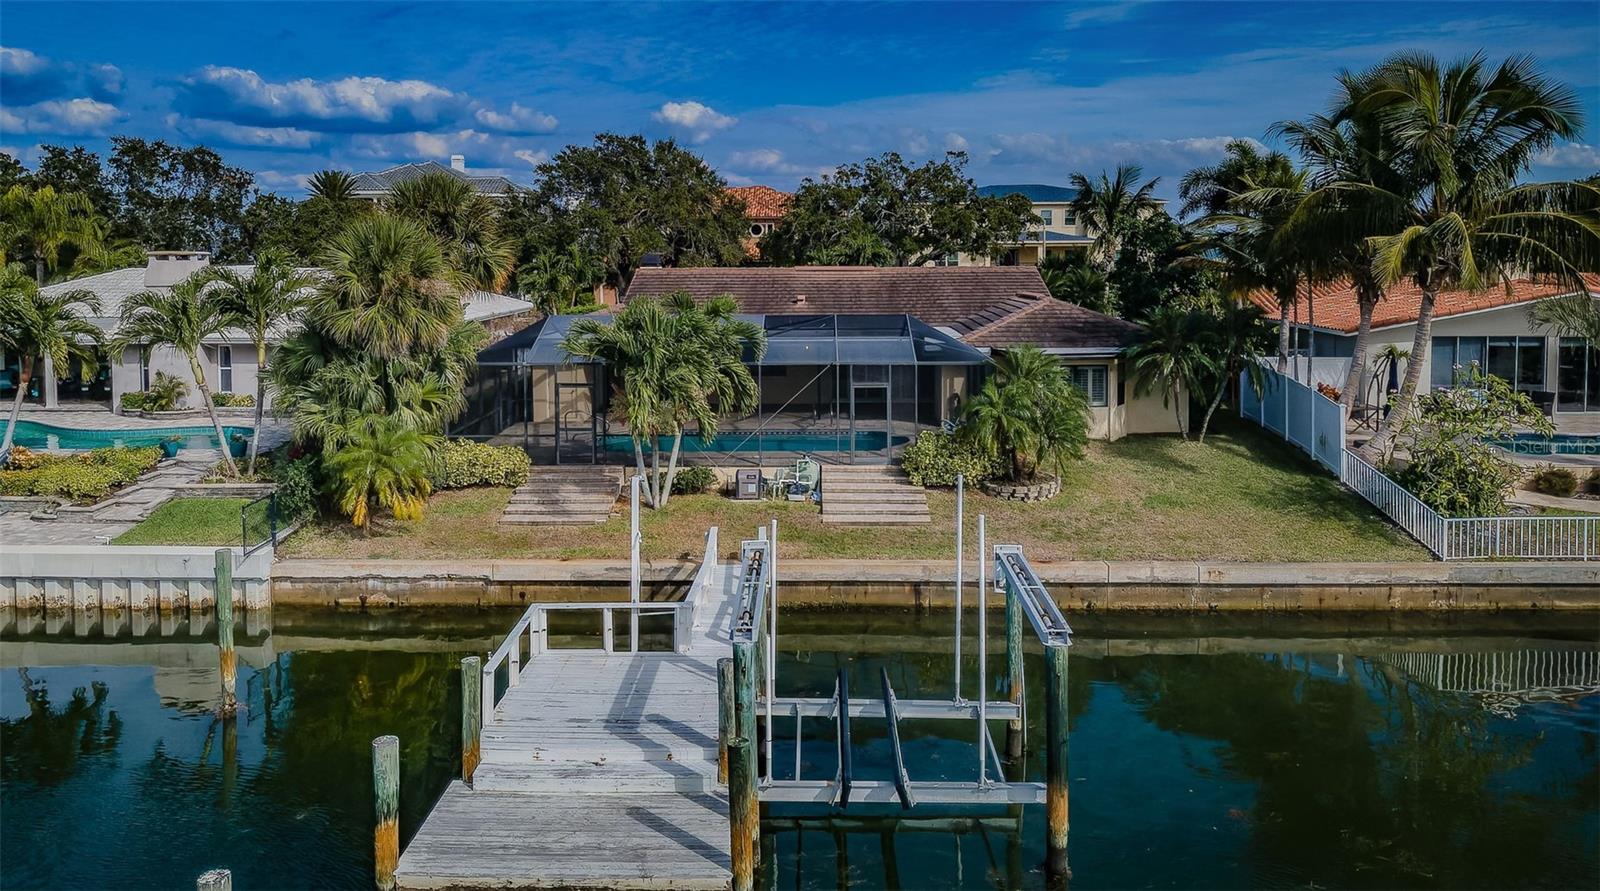 Complemented by a thoughtfully placed boatlift, this property seamlessly combines the joy of a waterview with the practicality of a dock, making it a dream home for those seeking a waterside haven.